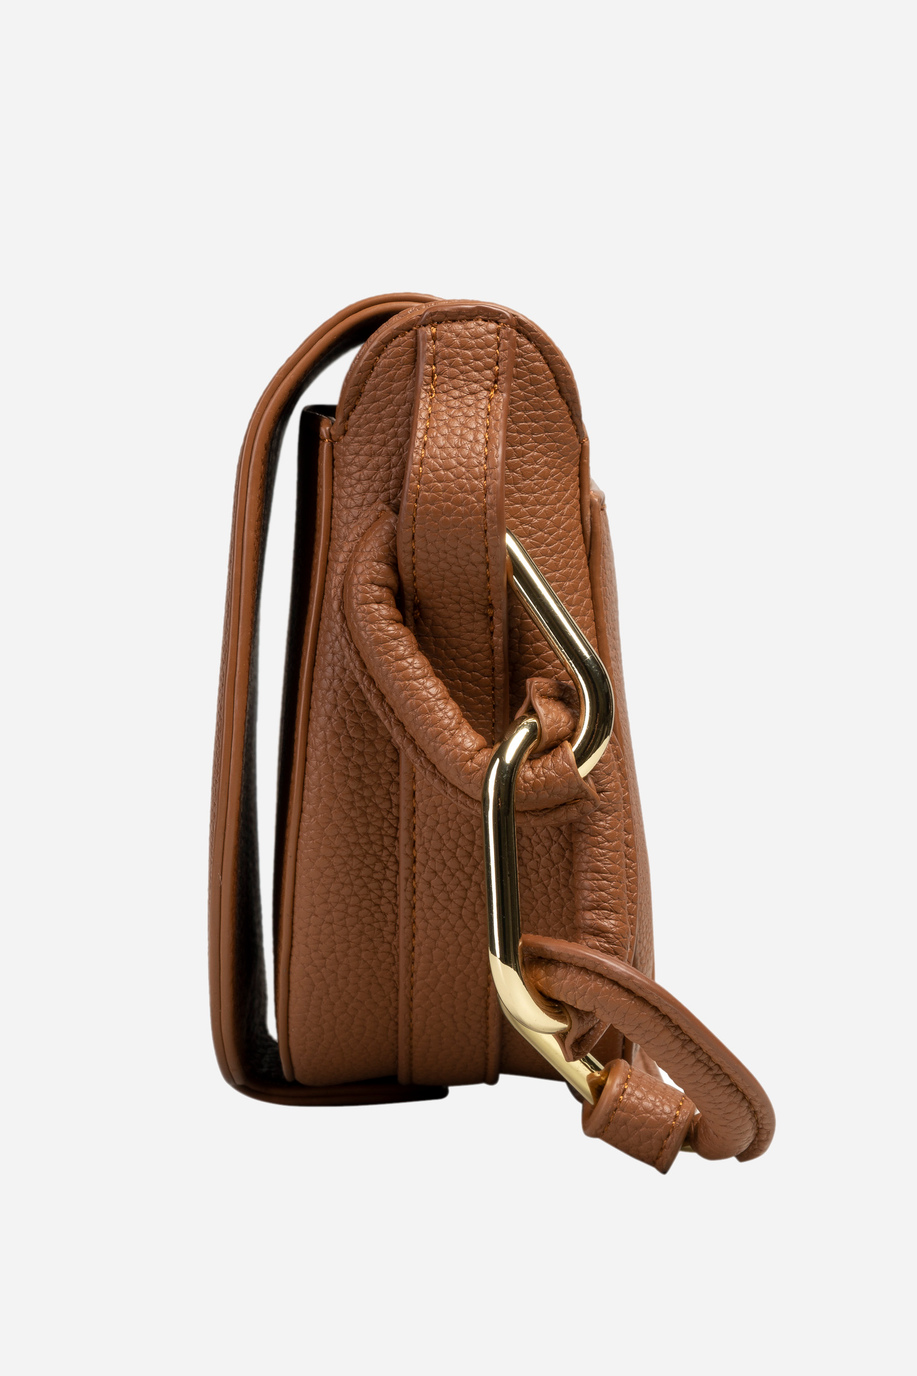 Leather crossbody bag - Paloma - Accessories | La Martina - Official Online Shop